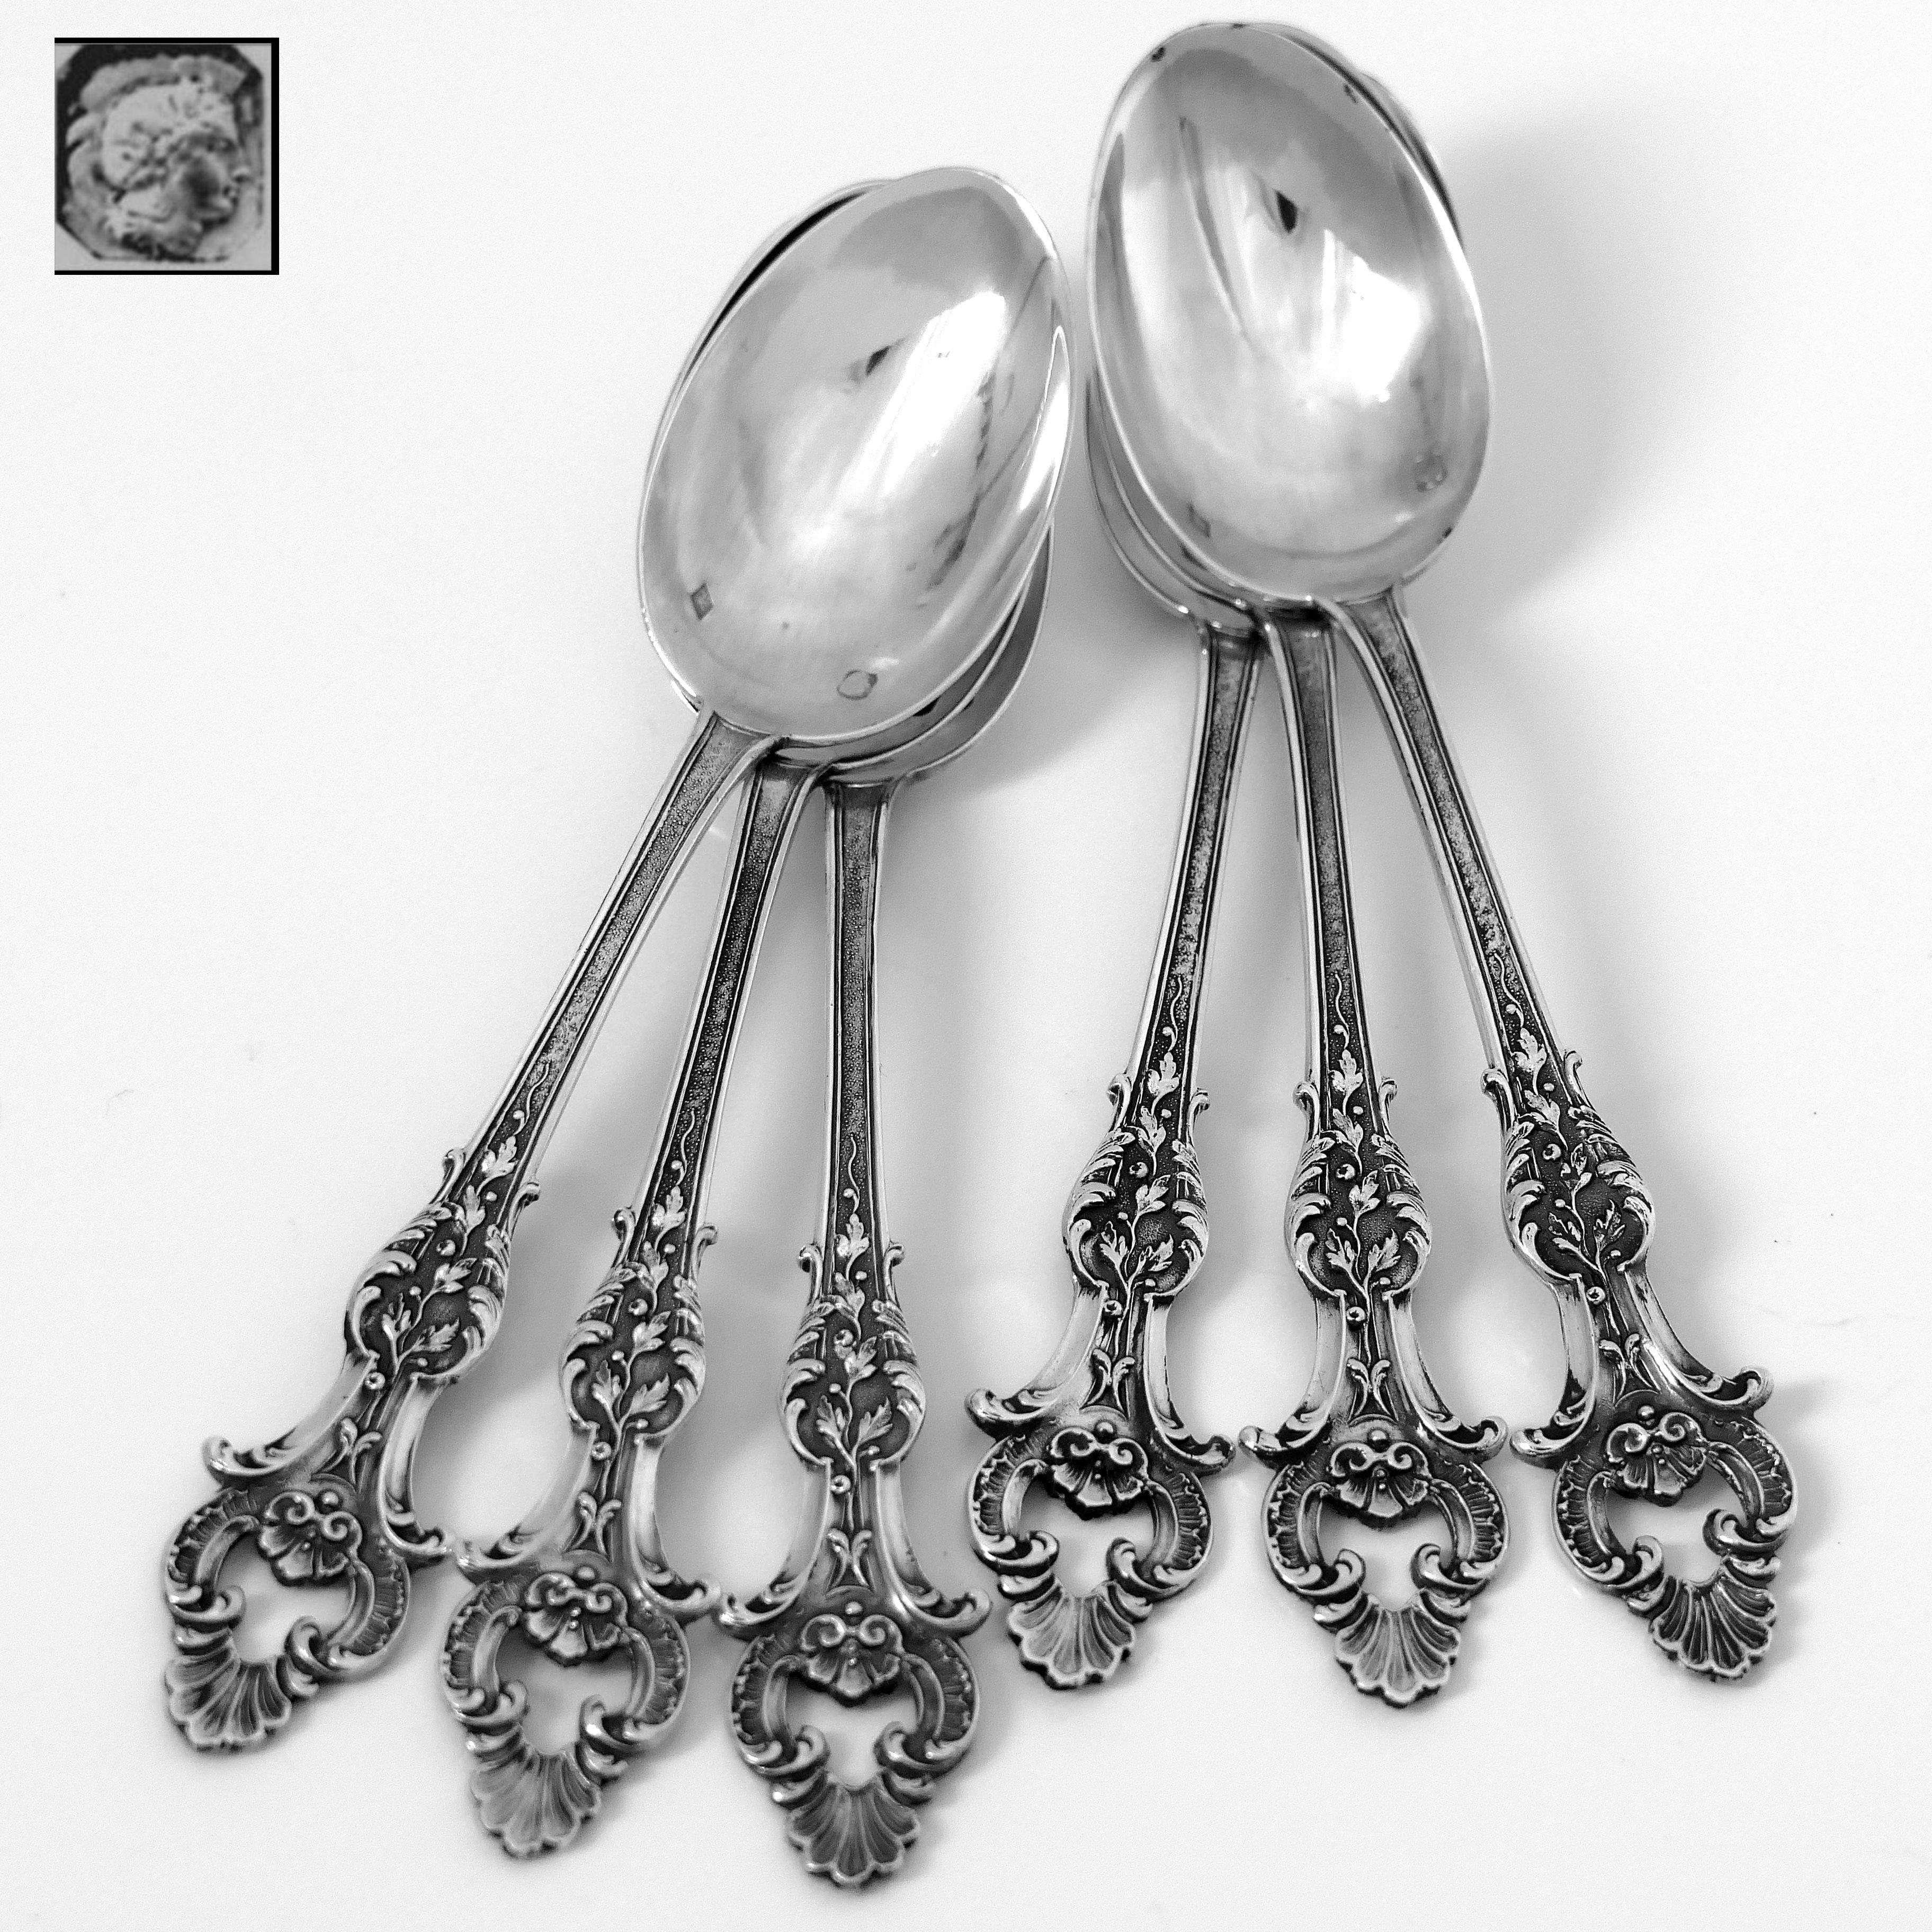 Early 20th Century Antique French Sterling Silver Moka Espresso Spoons Set, 6 Piece